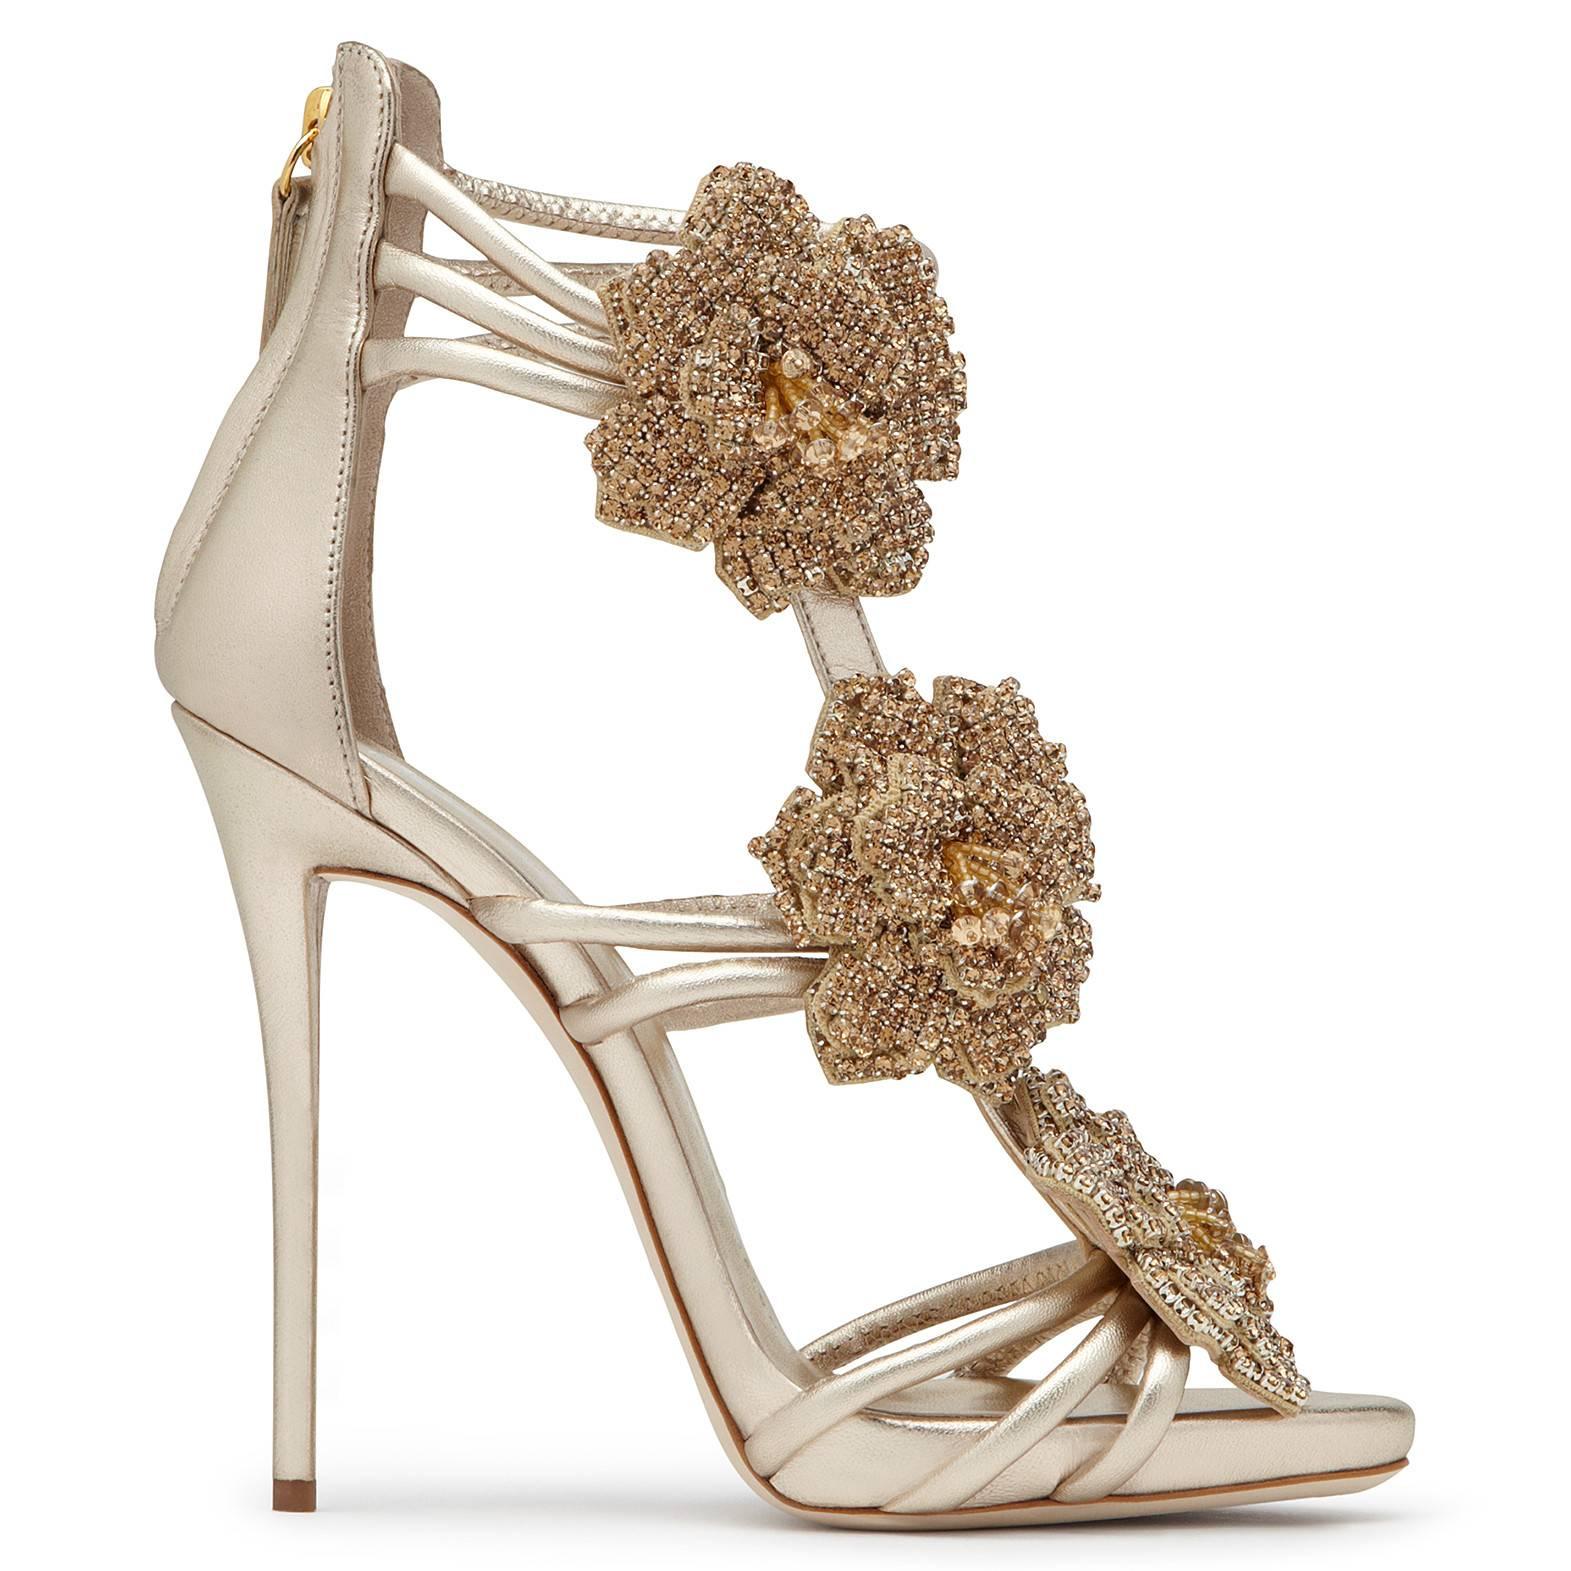 Women's Giuseppe Zanotti New Gold Leather Crystal Rose Evening Sandals Heels in Box